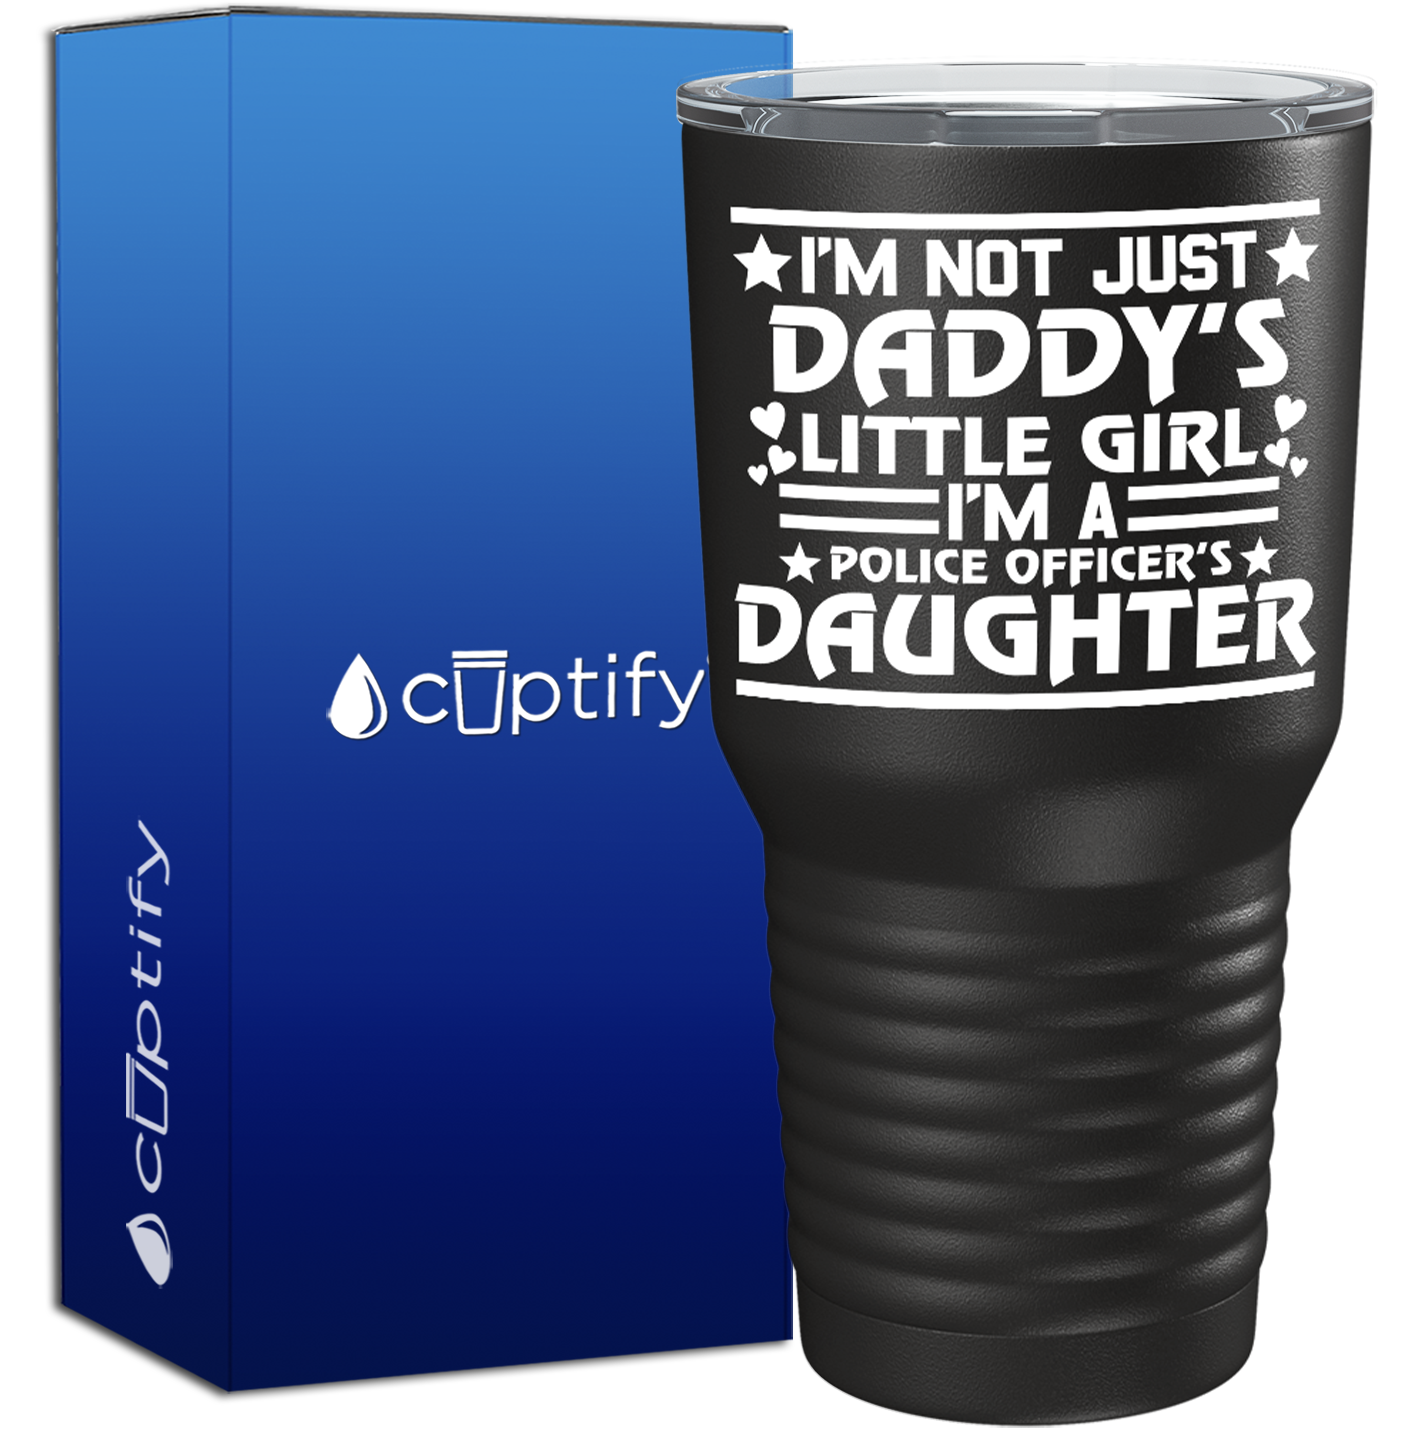 I'm Not just Daddy's Little Girl on Black 30oz Police Tumbler